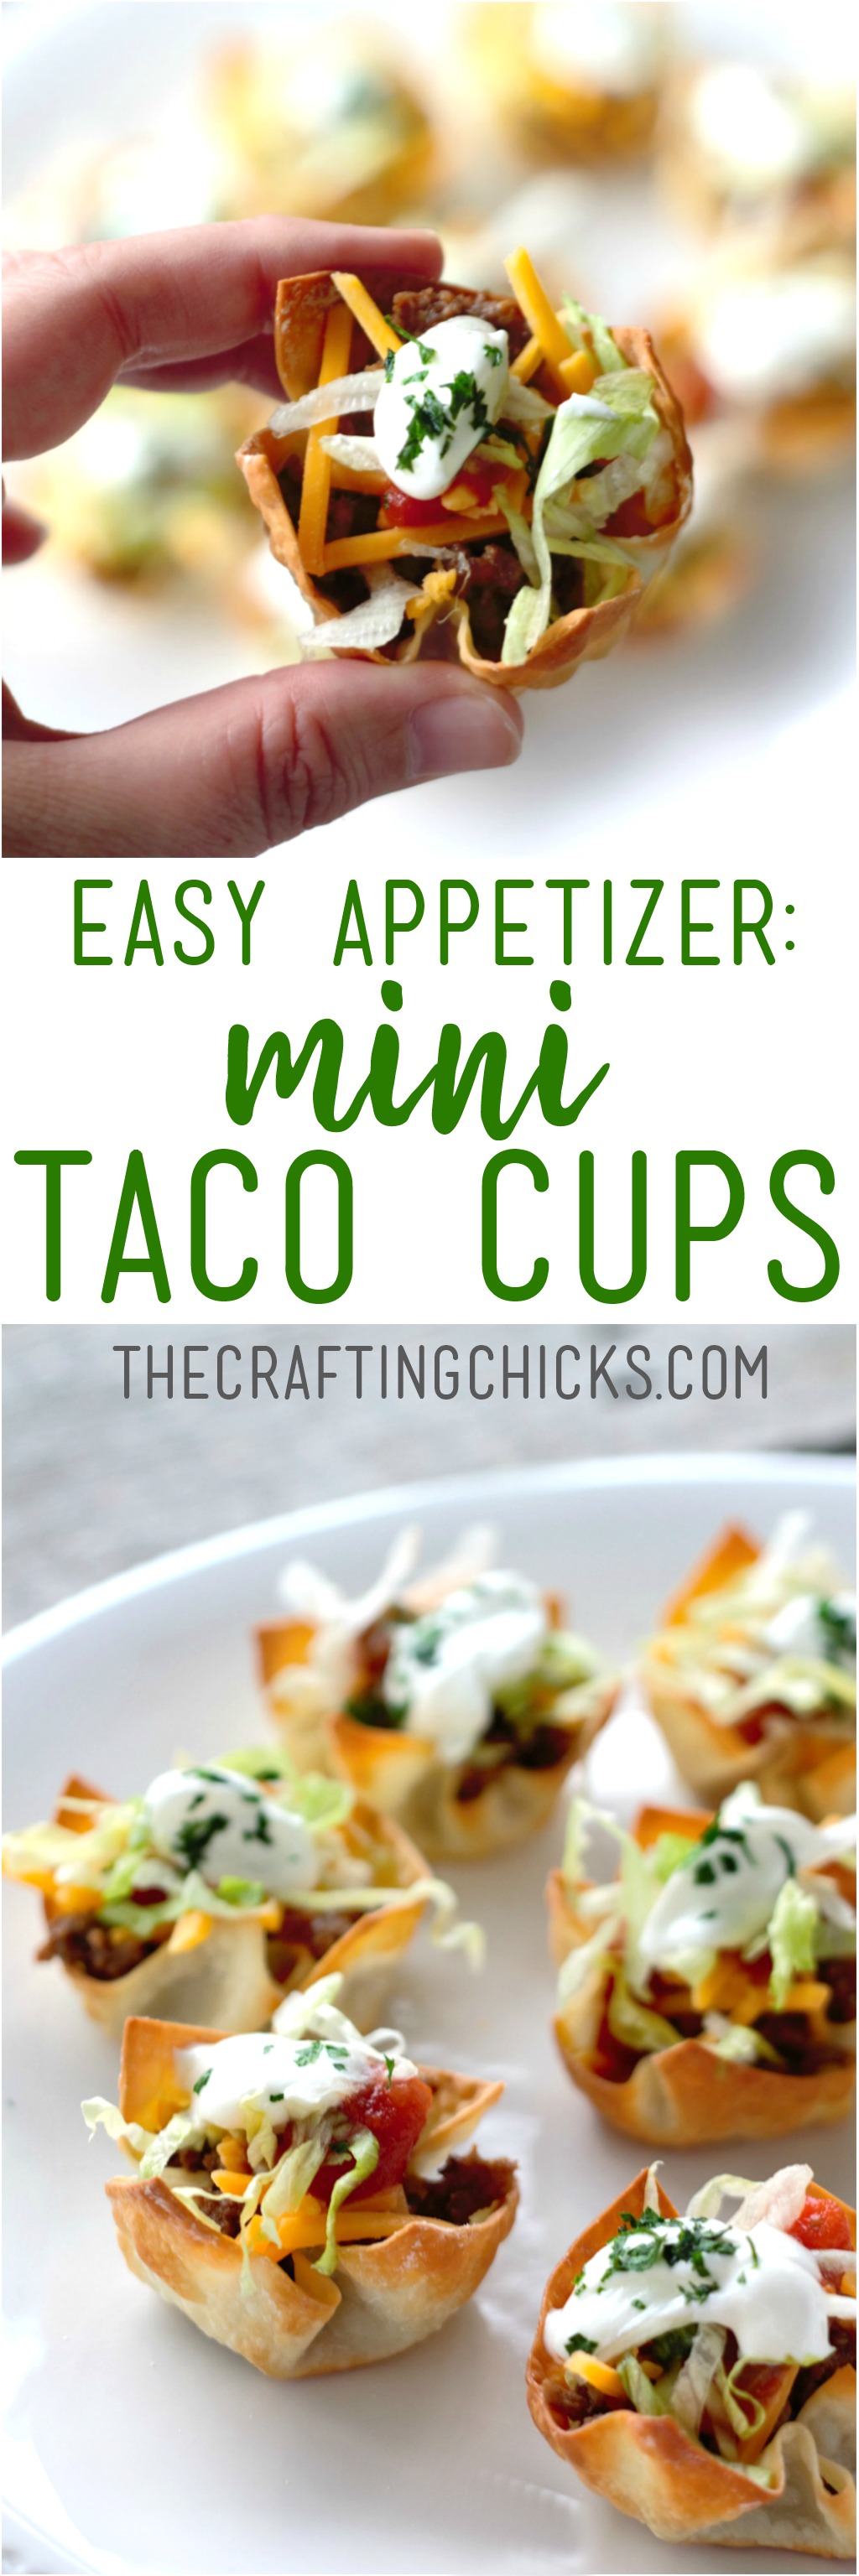 Mini Taco Cups - A Quick & Easy Appetizer - The Crafting Chicks